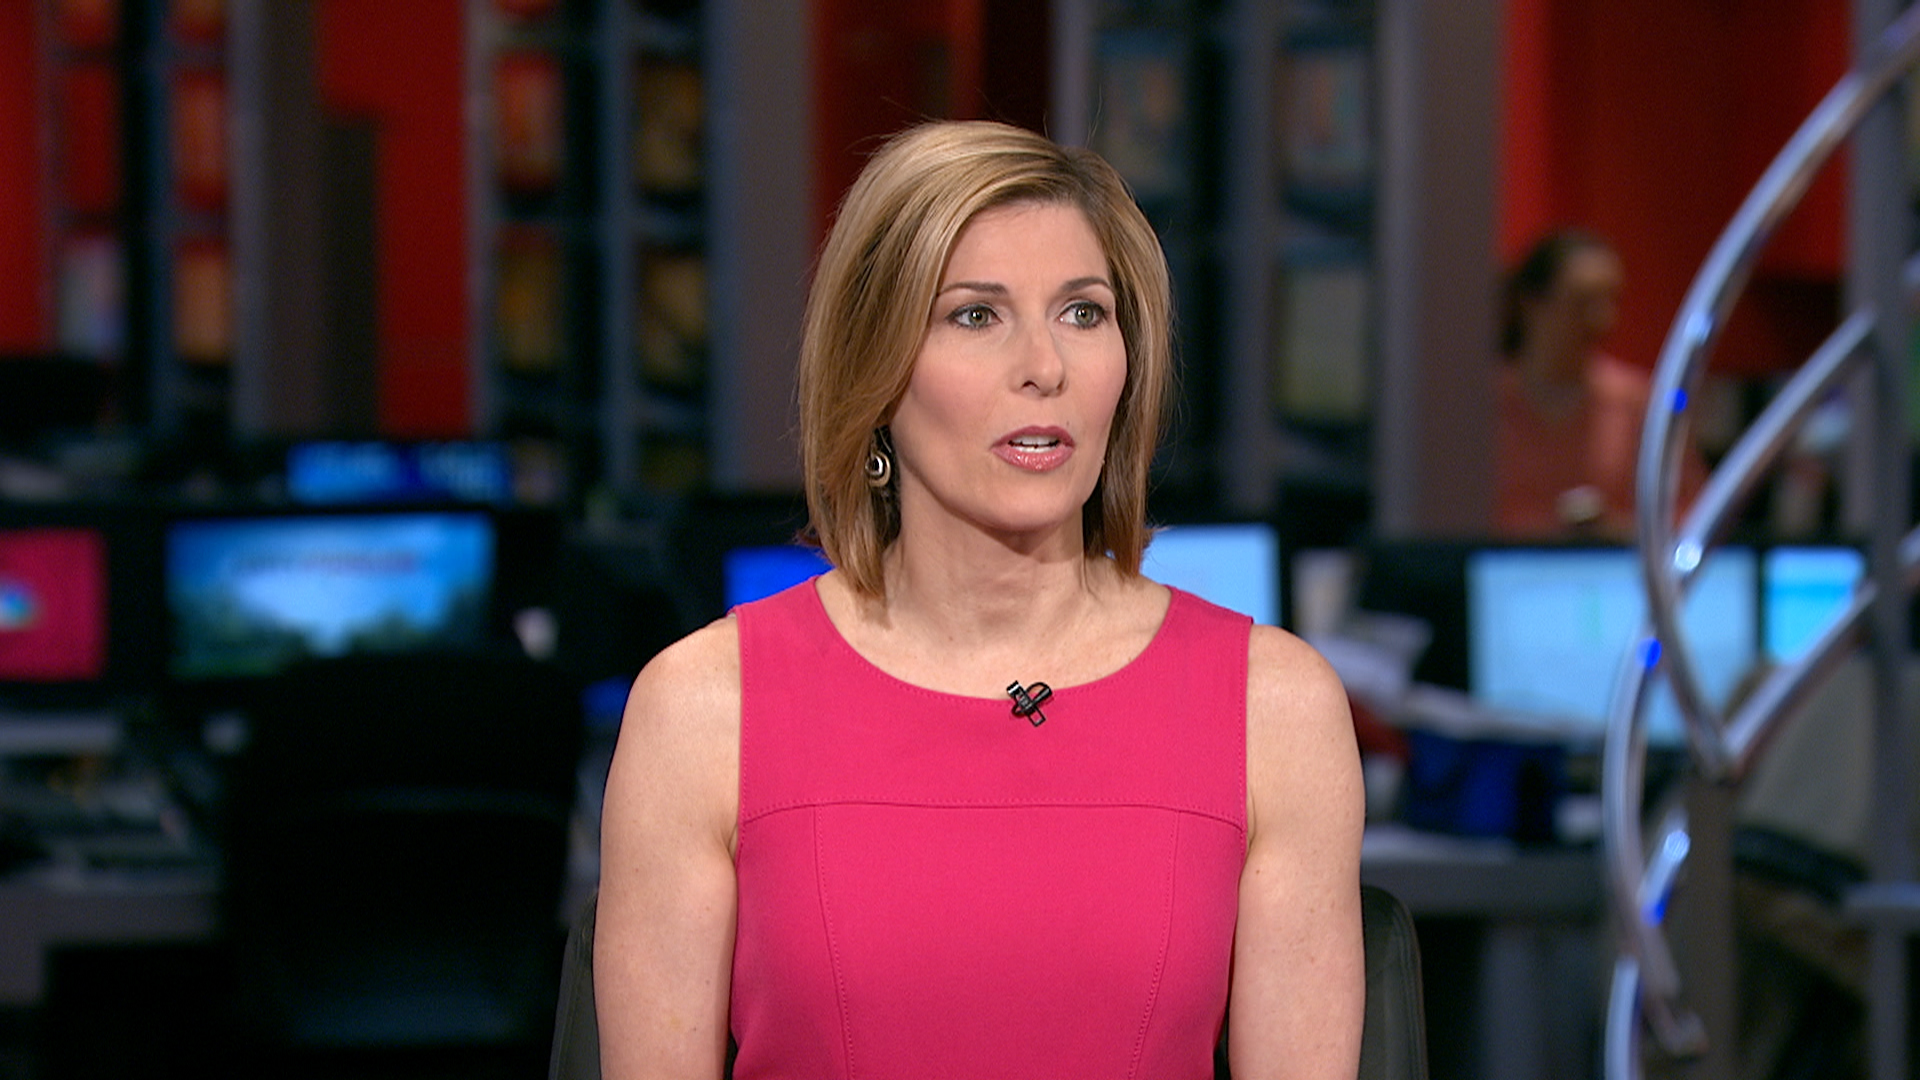 Sharyl Attkisson on why she left her network.